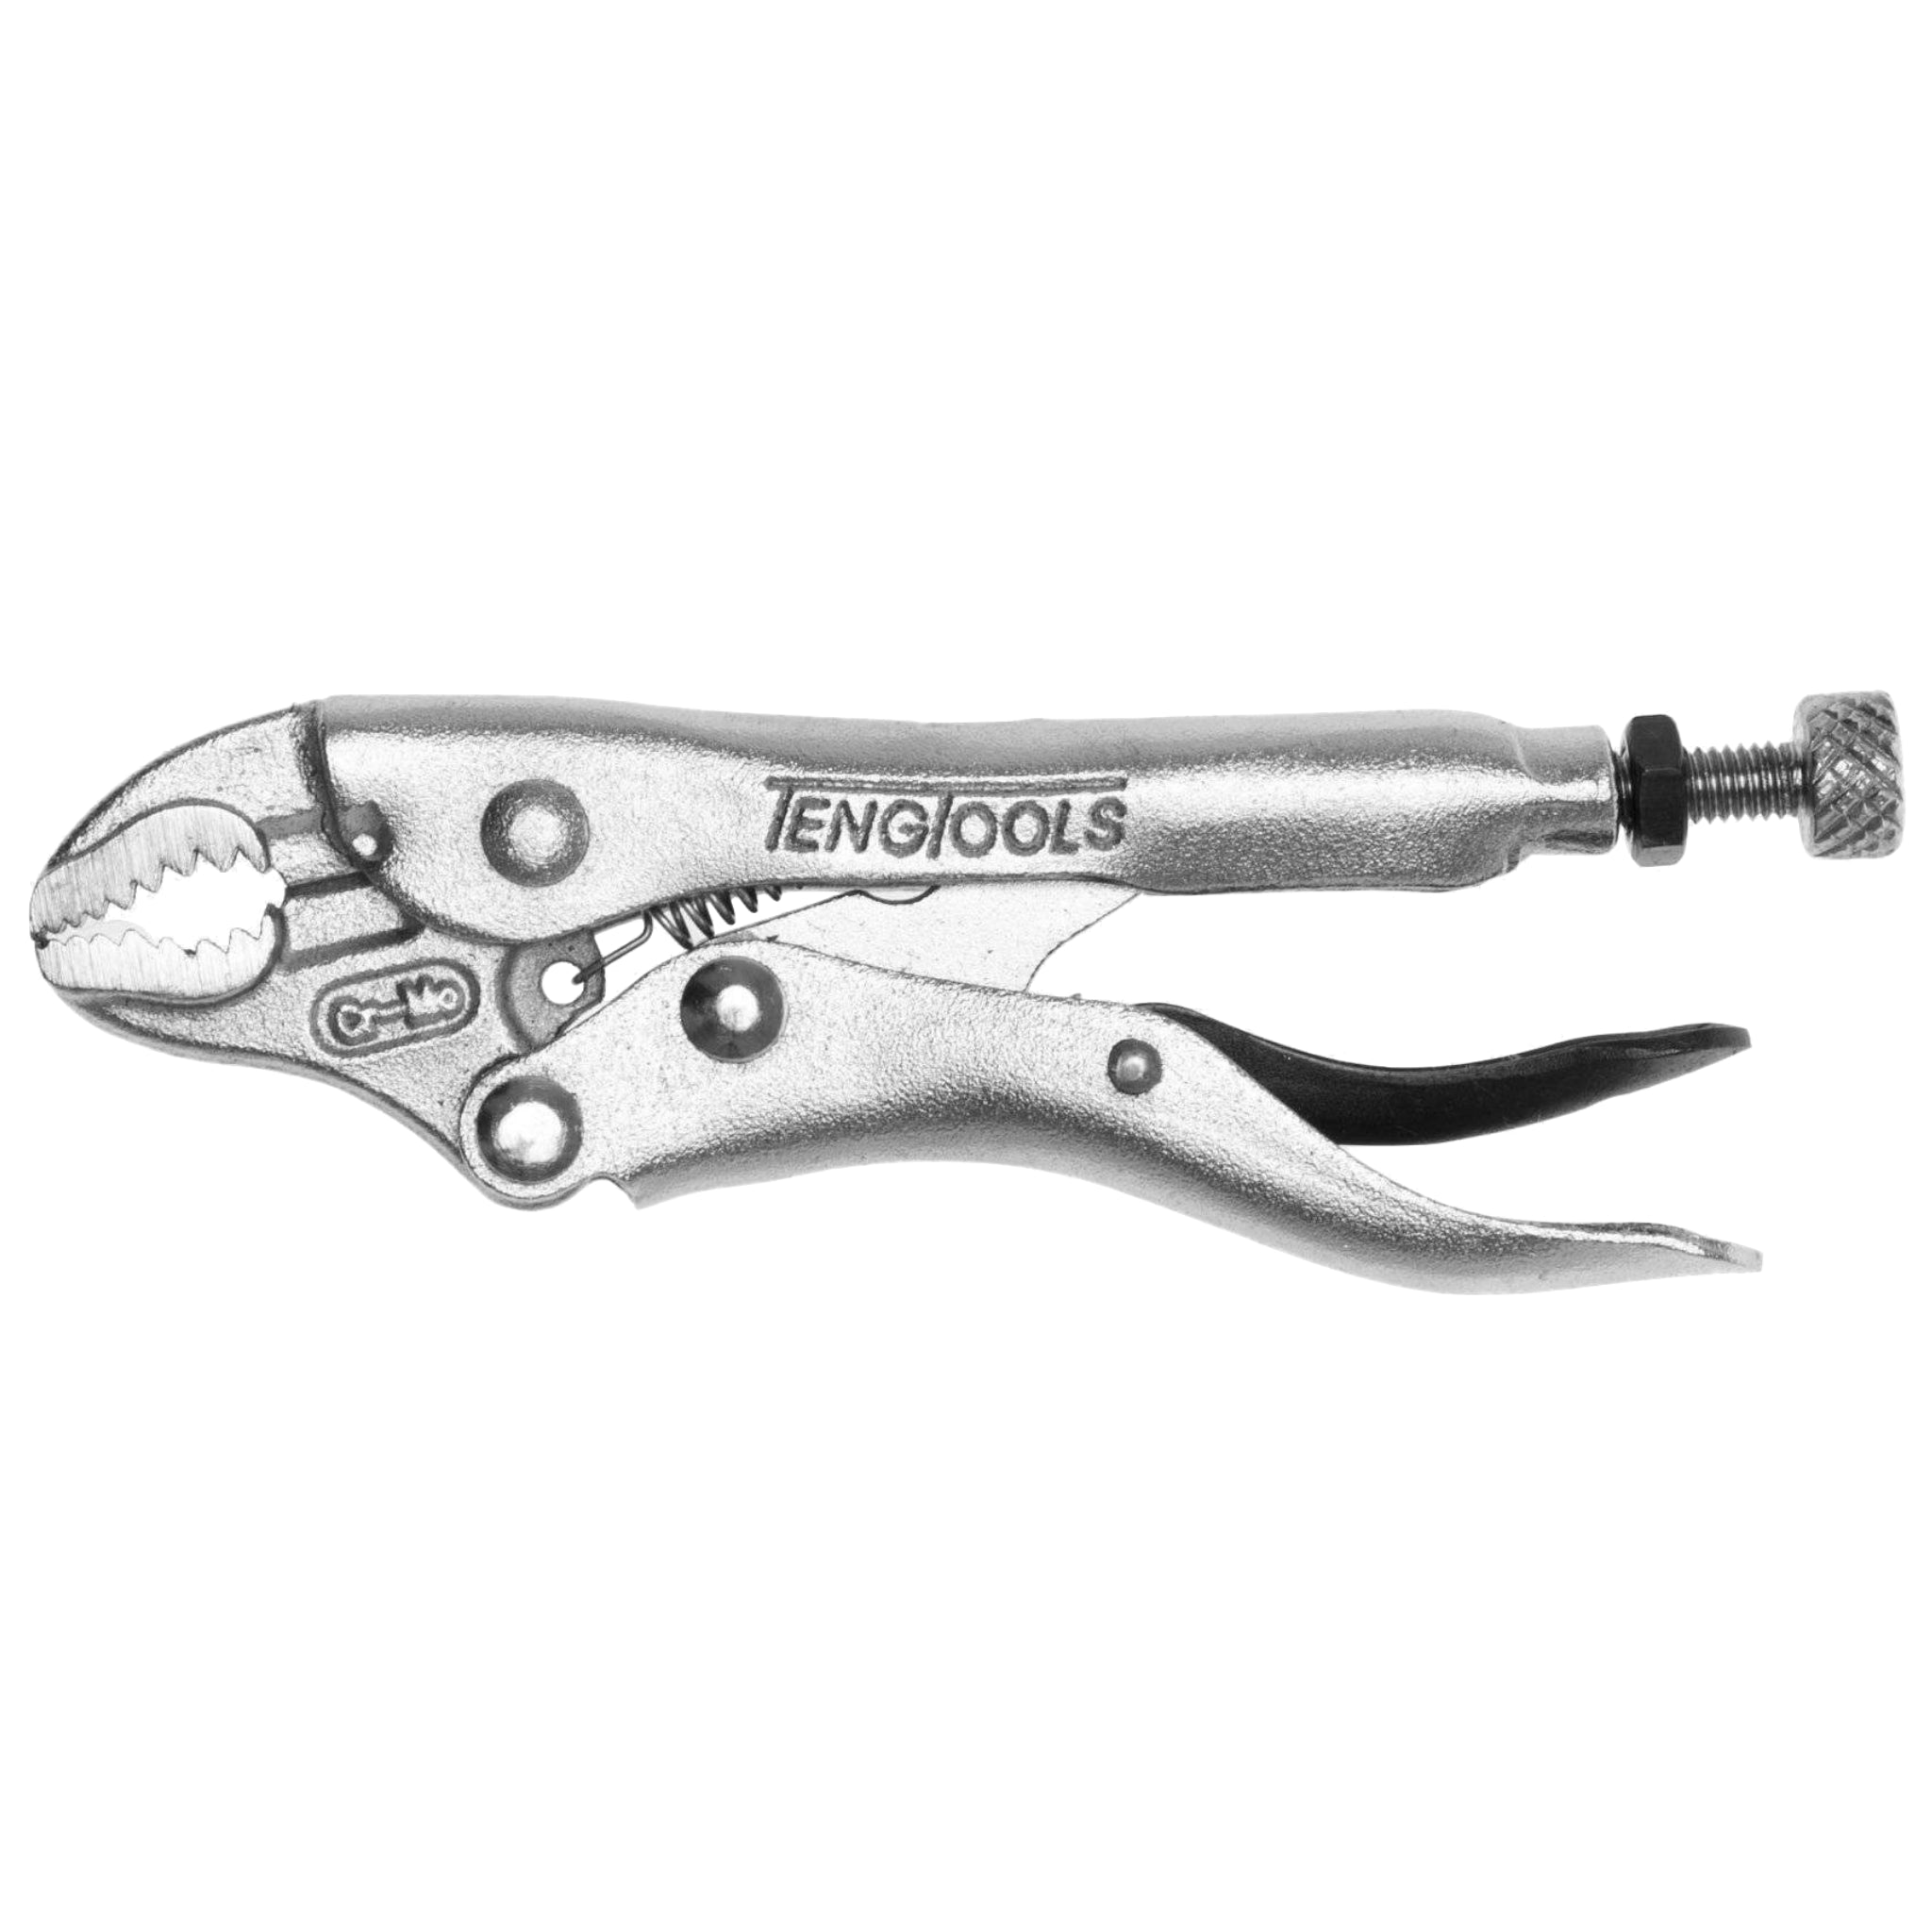 Teng Tools Locking Vise Grip Style Pliers With Curved Jaws - 7 Inch